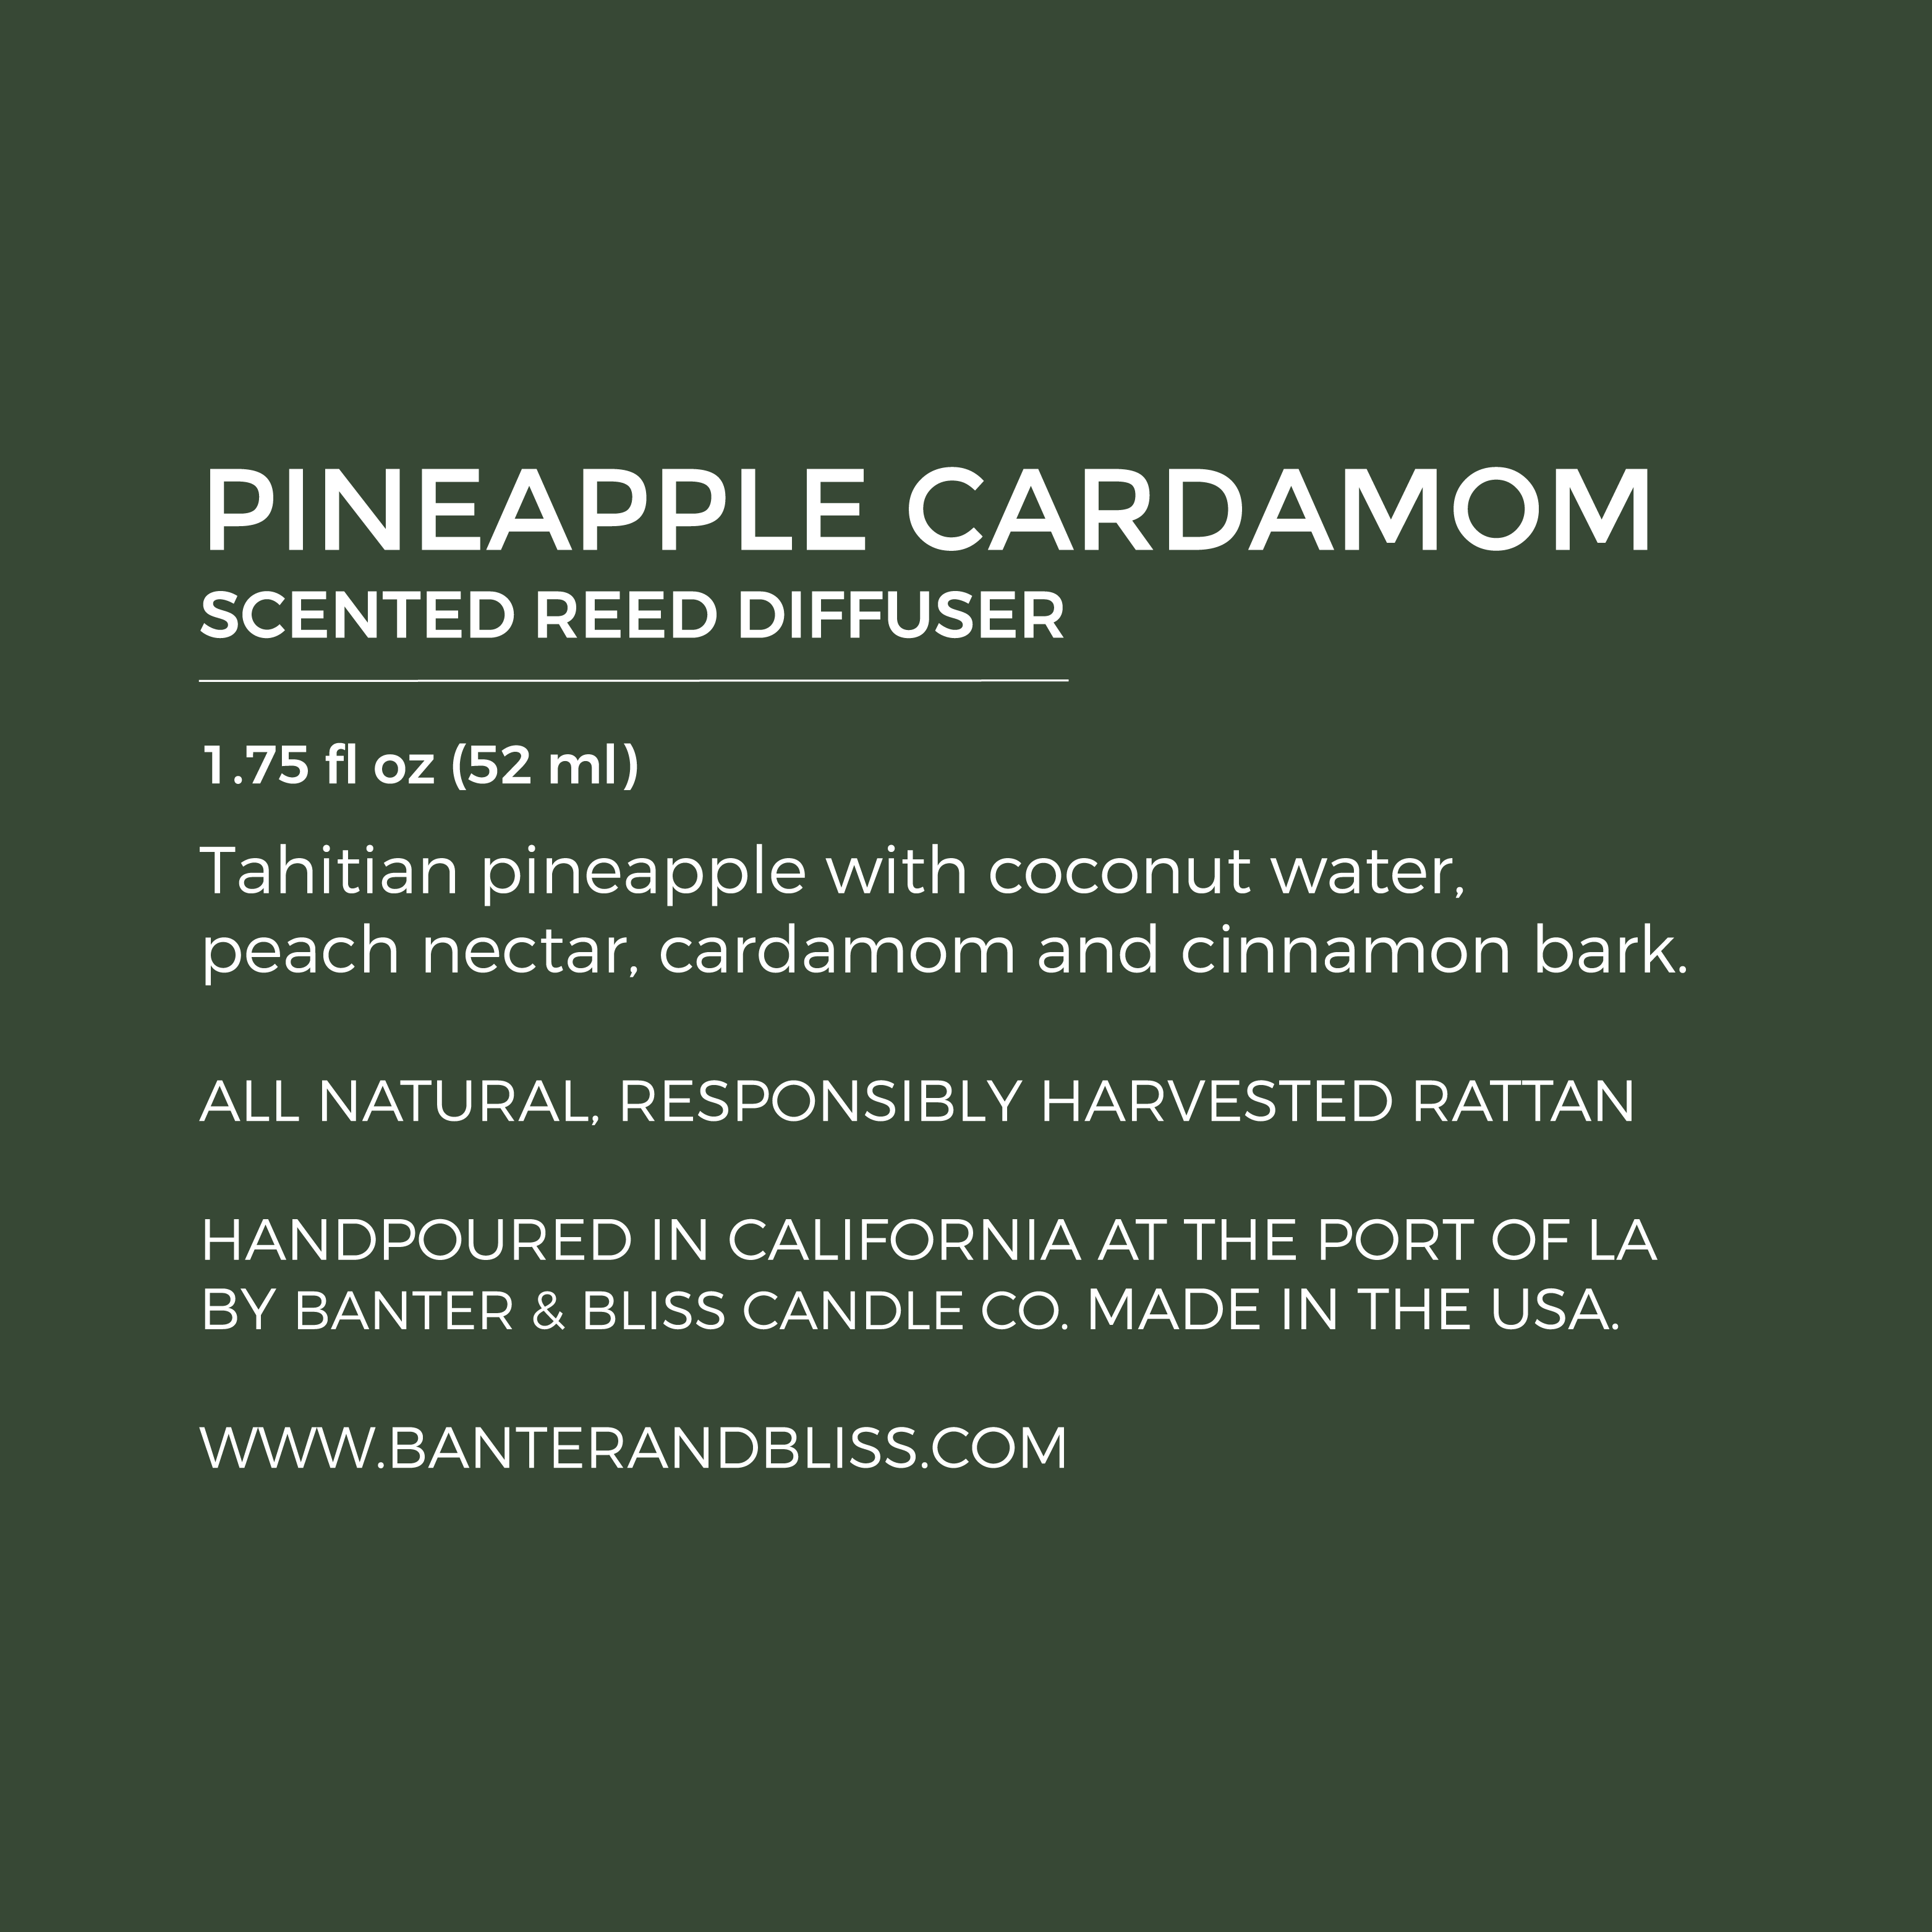 Pineapple Cardamom. Scented Reed Diffuser.